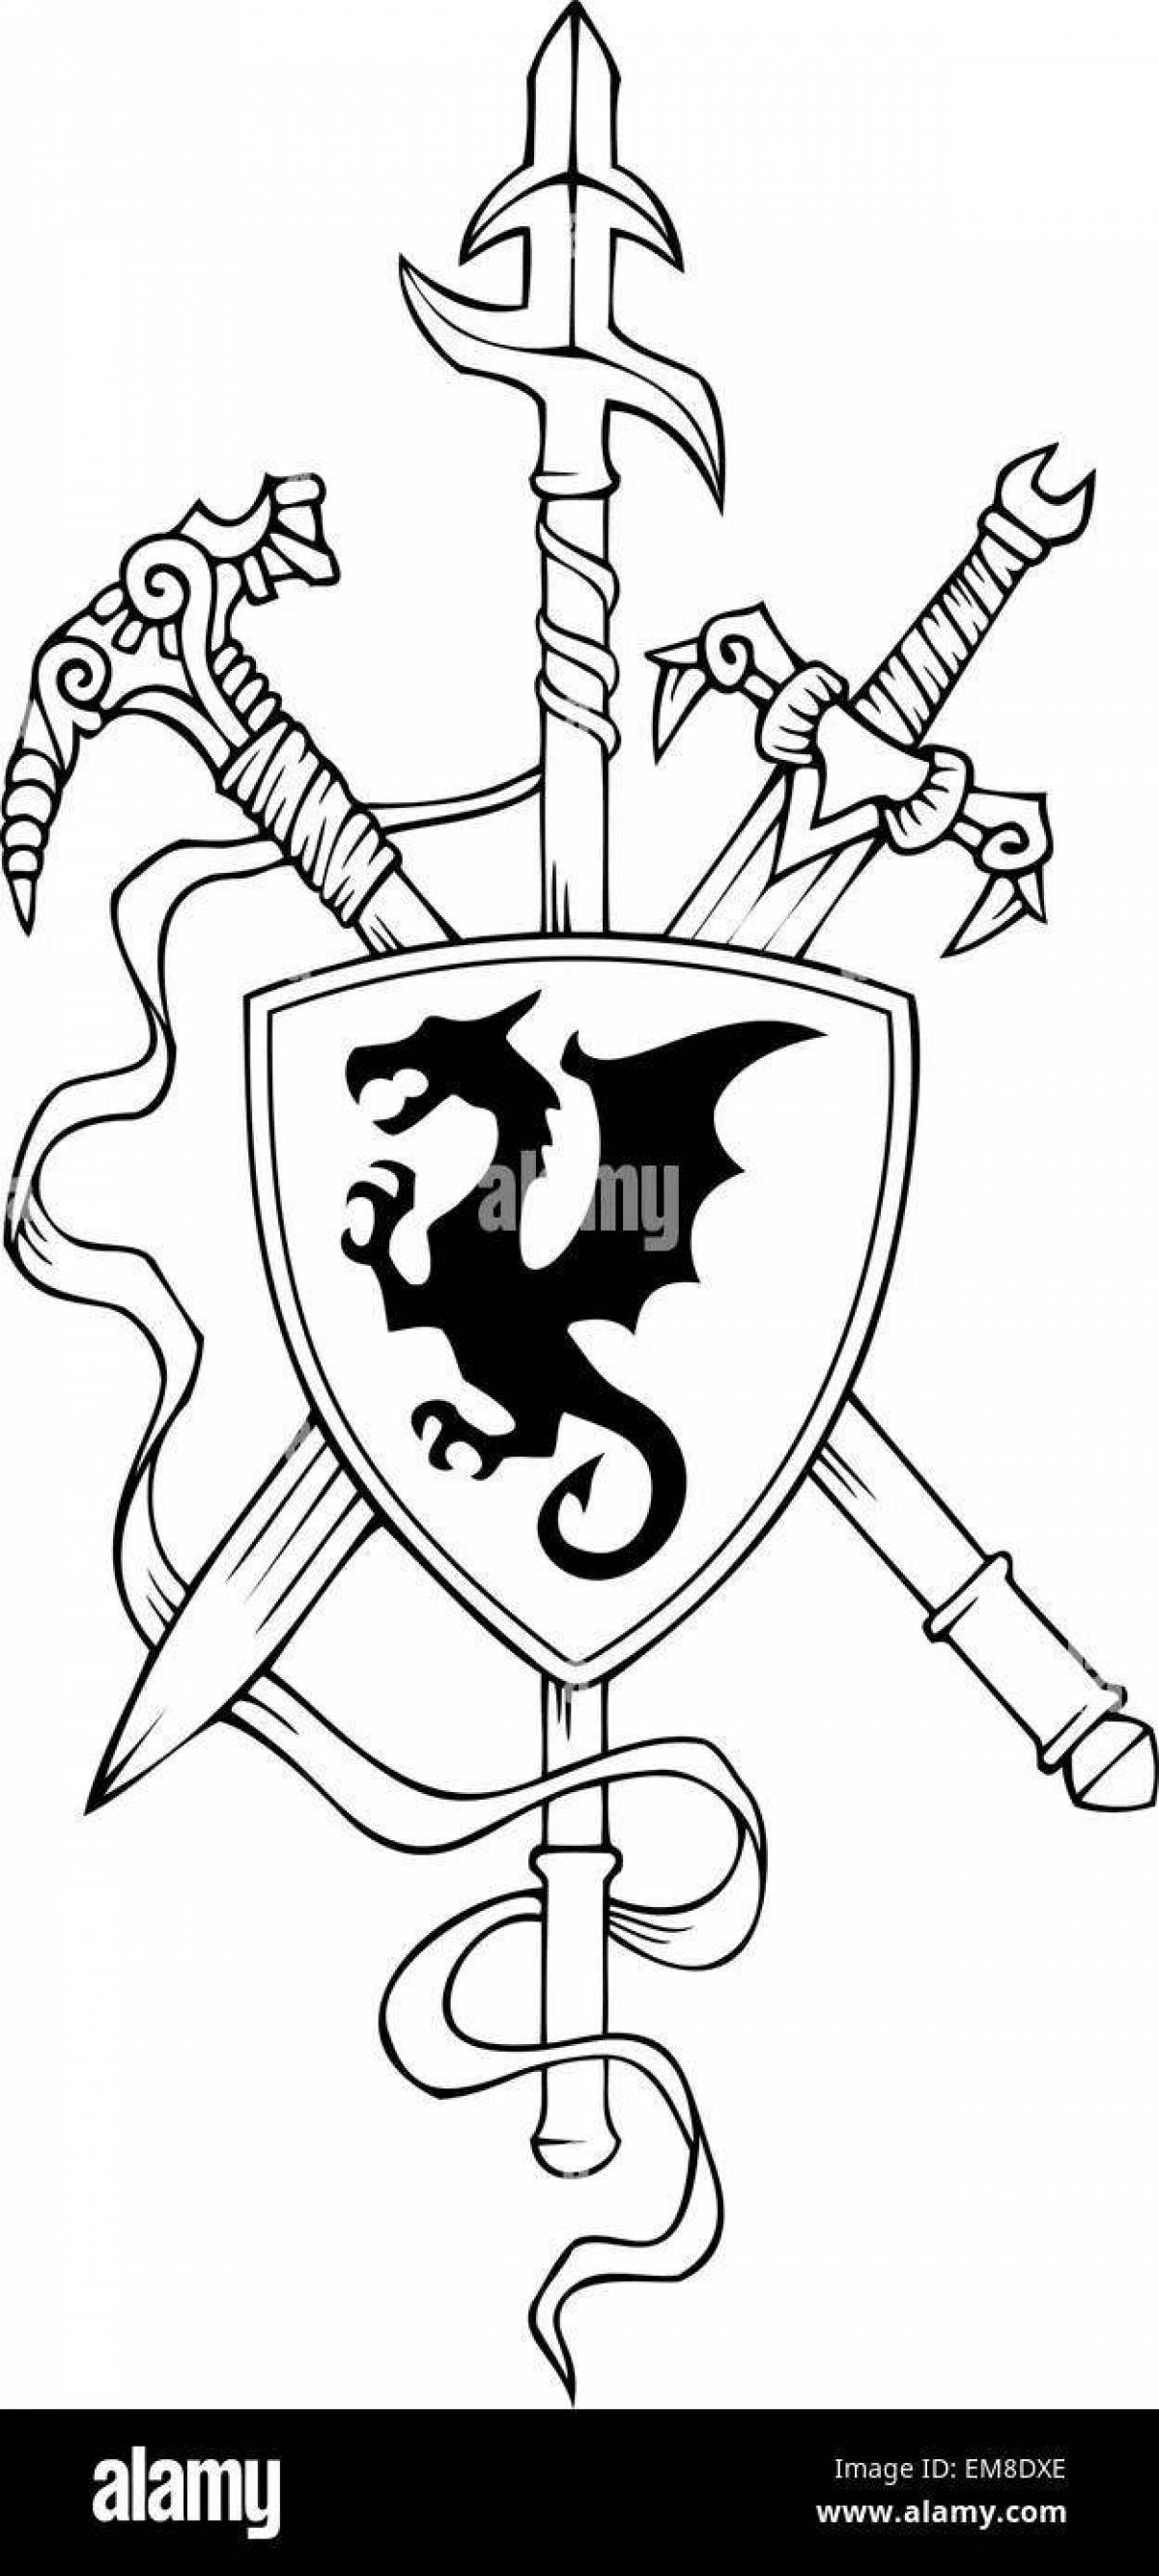 Ornate coloring book coat of arms